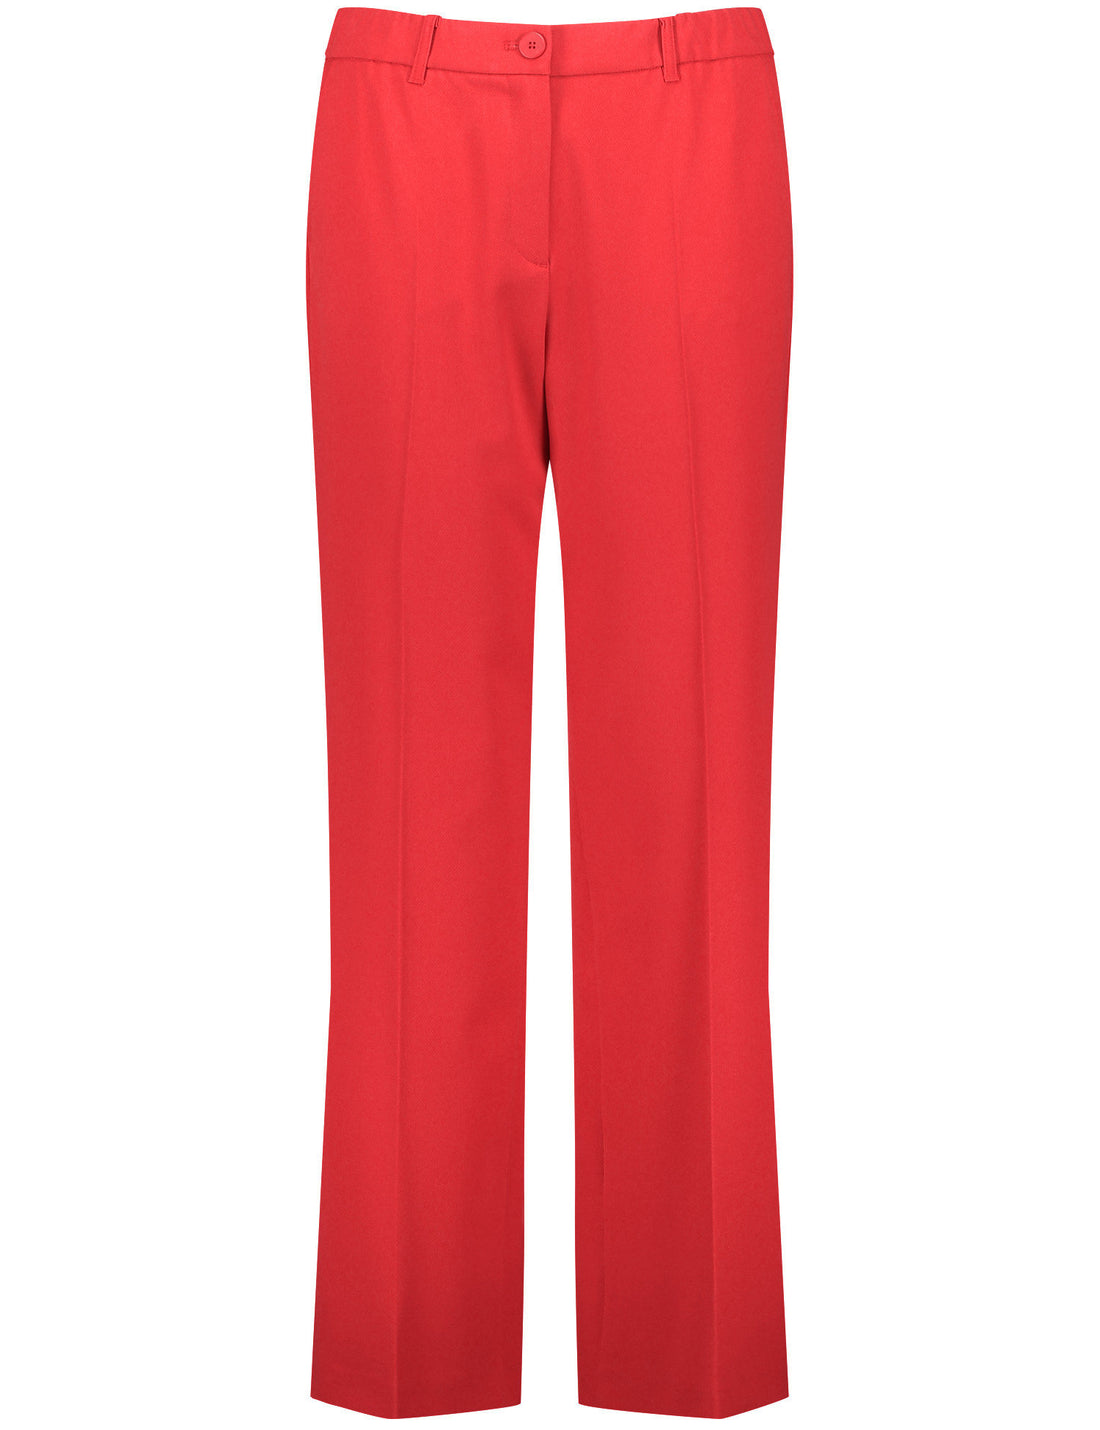 Smart Trousers With A Wide Leg, Greta_320222-21321_6380_02